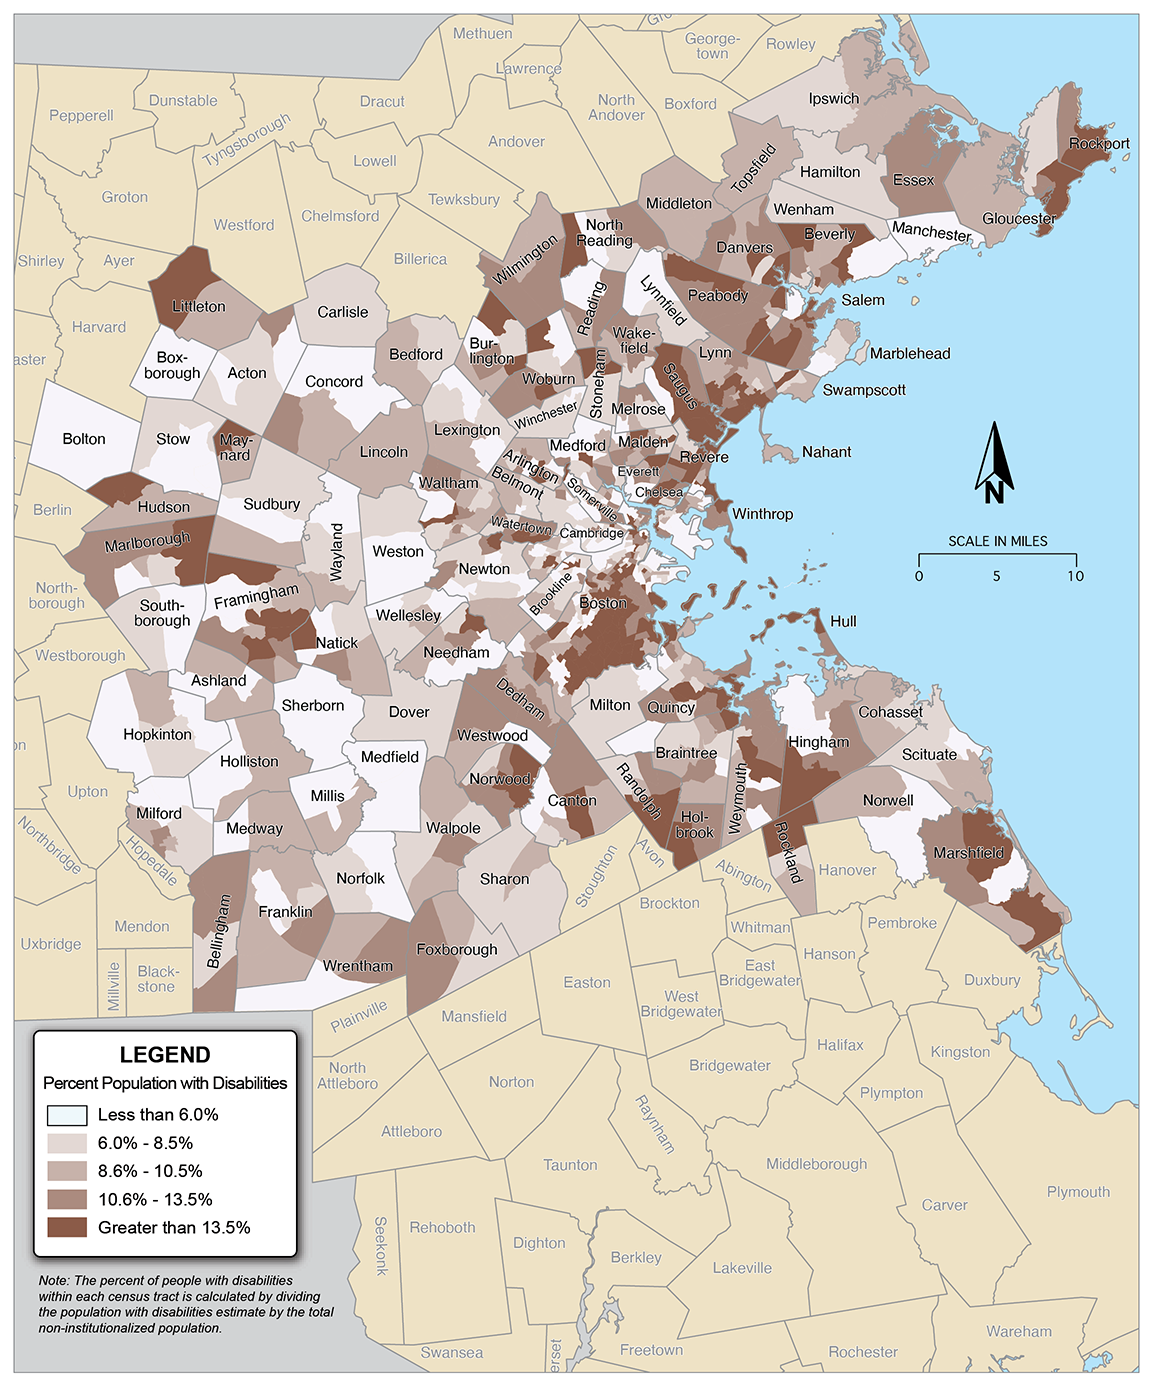 Figure 6-5 is a map showing the percent of the population with disabilities in each census tract across the 97 communities in the Boston region.